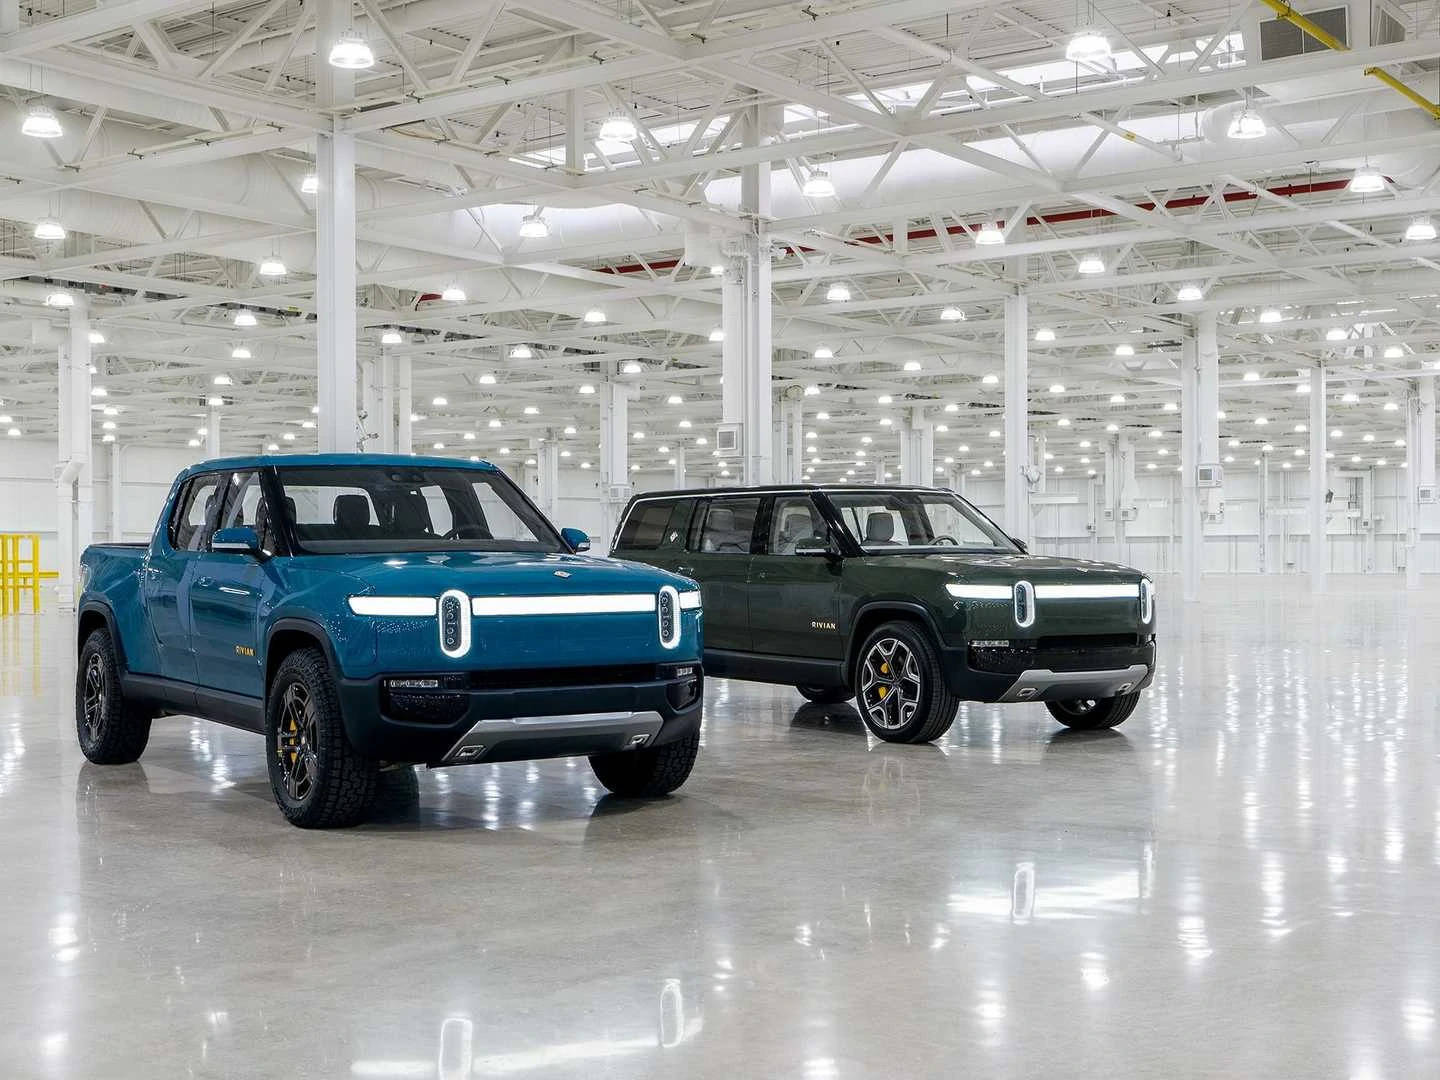 Launch editions of Rivian's pickup and SUV are priced at $73,000 and $75,500, respectively, with 2022 models available for preorder at $67,500 for the R1T and $70,000 for the R1S. Amazon has ordered 100,000 electric vans from Rivian through 2024, with production scheduled to begin in the fall of this year.